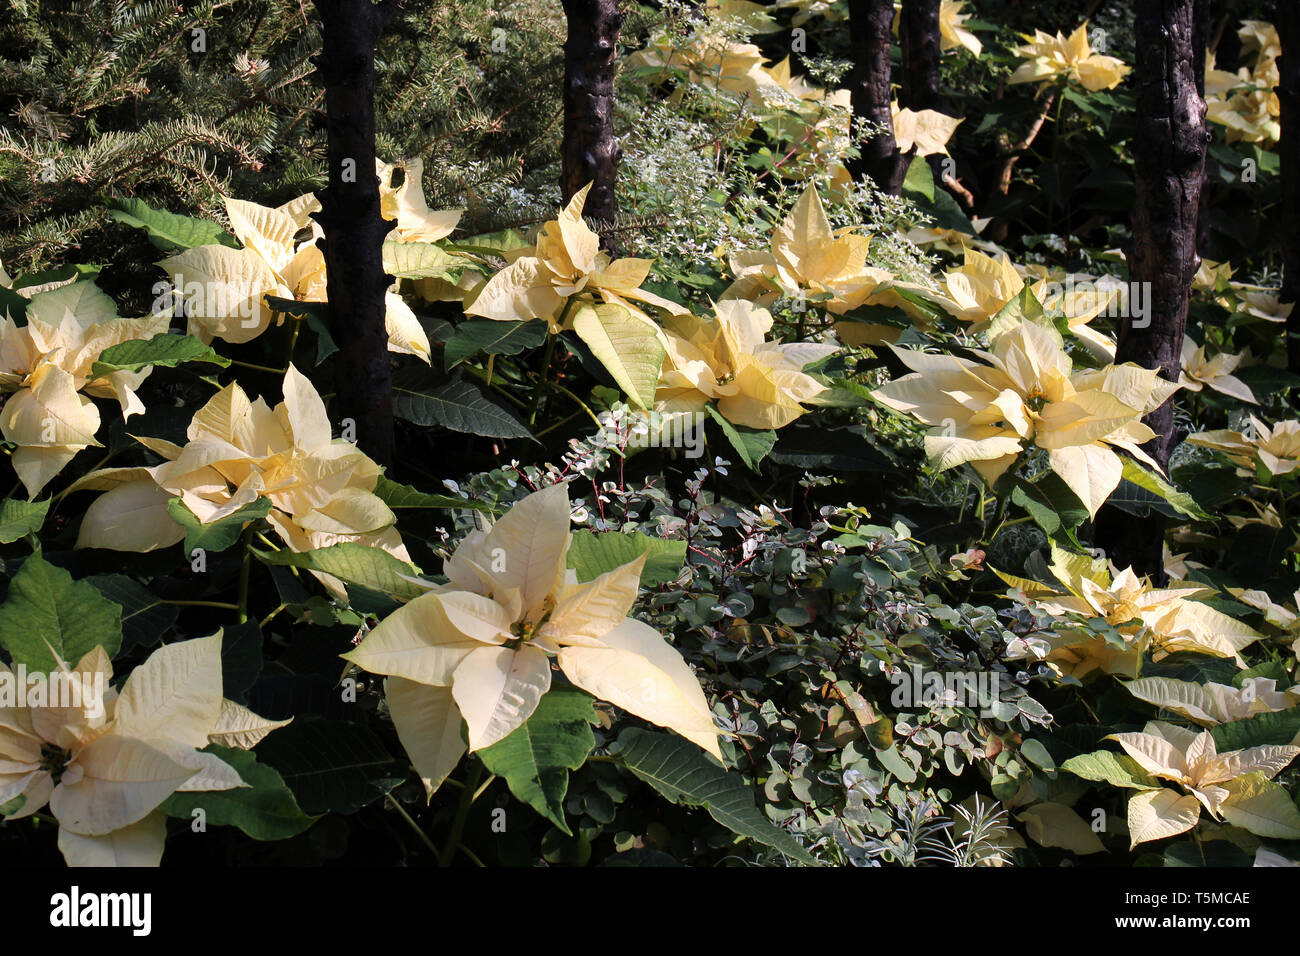 A group of Diamond Frost Poinsettias growing amidst Snow Bush and evergreen trees Stock Photo